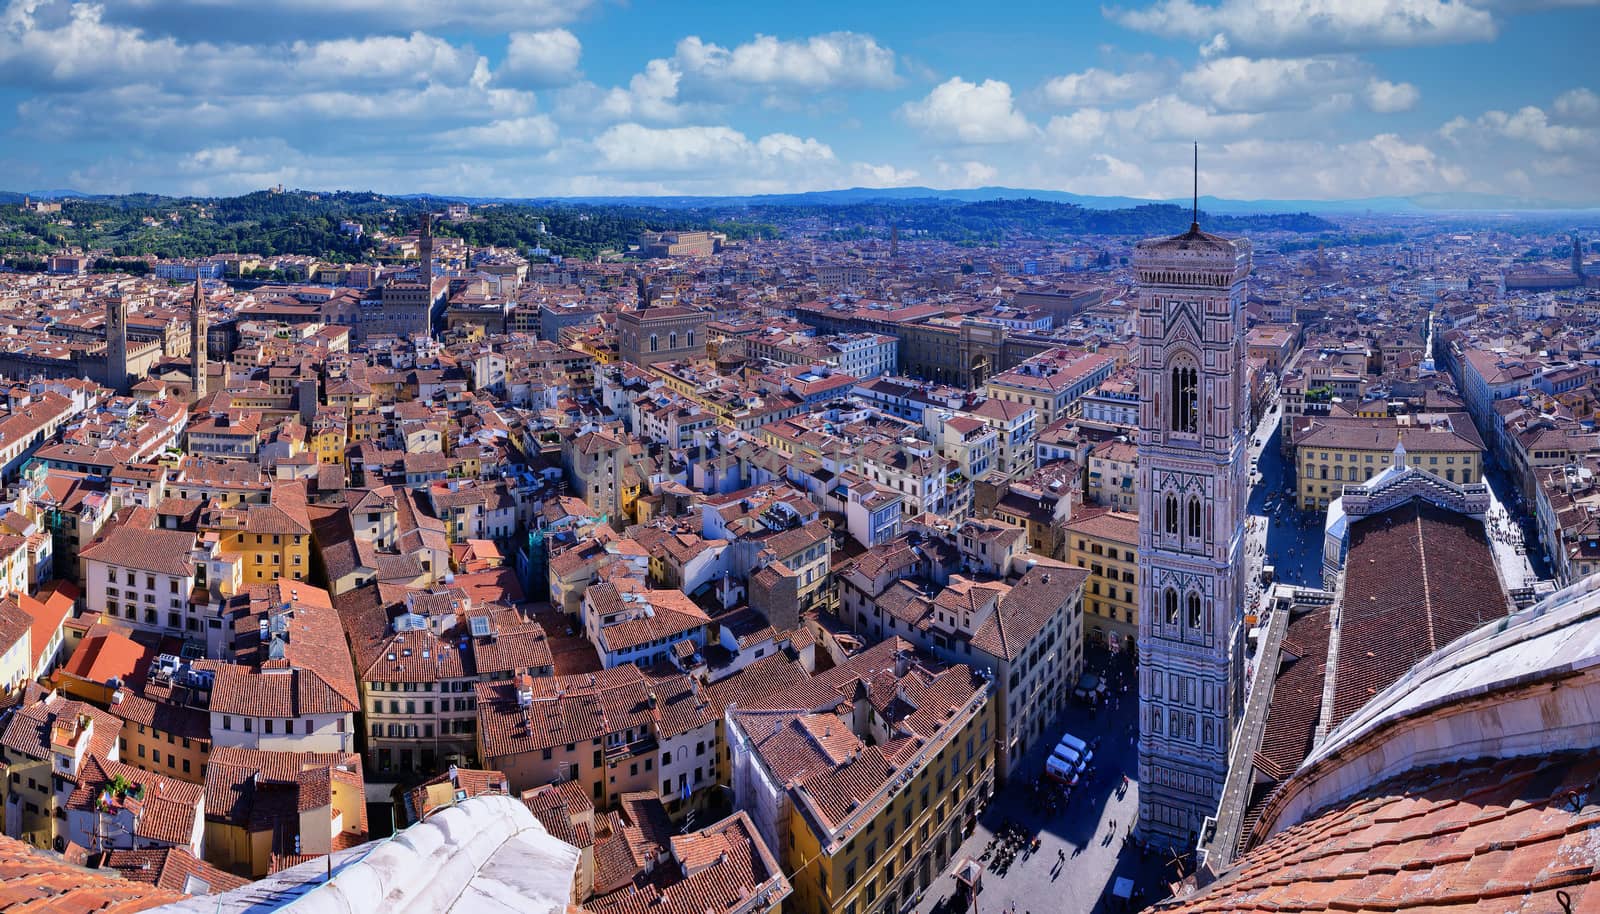 Florence, Italy - June 29, 2018: Panorama of cathedral, the dome of Brunelleschi, Campanile di Giotto, Piazza del Duomo, Firenze, Tuscany, Italy